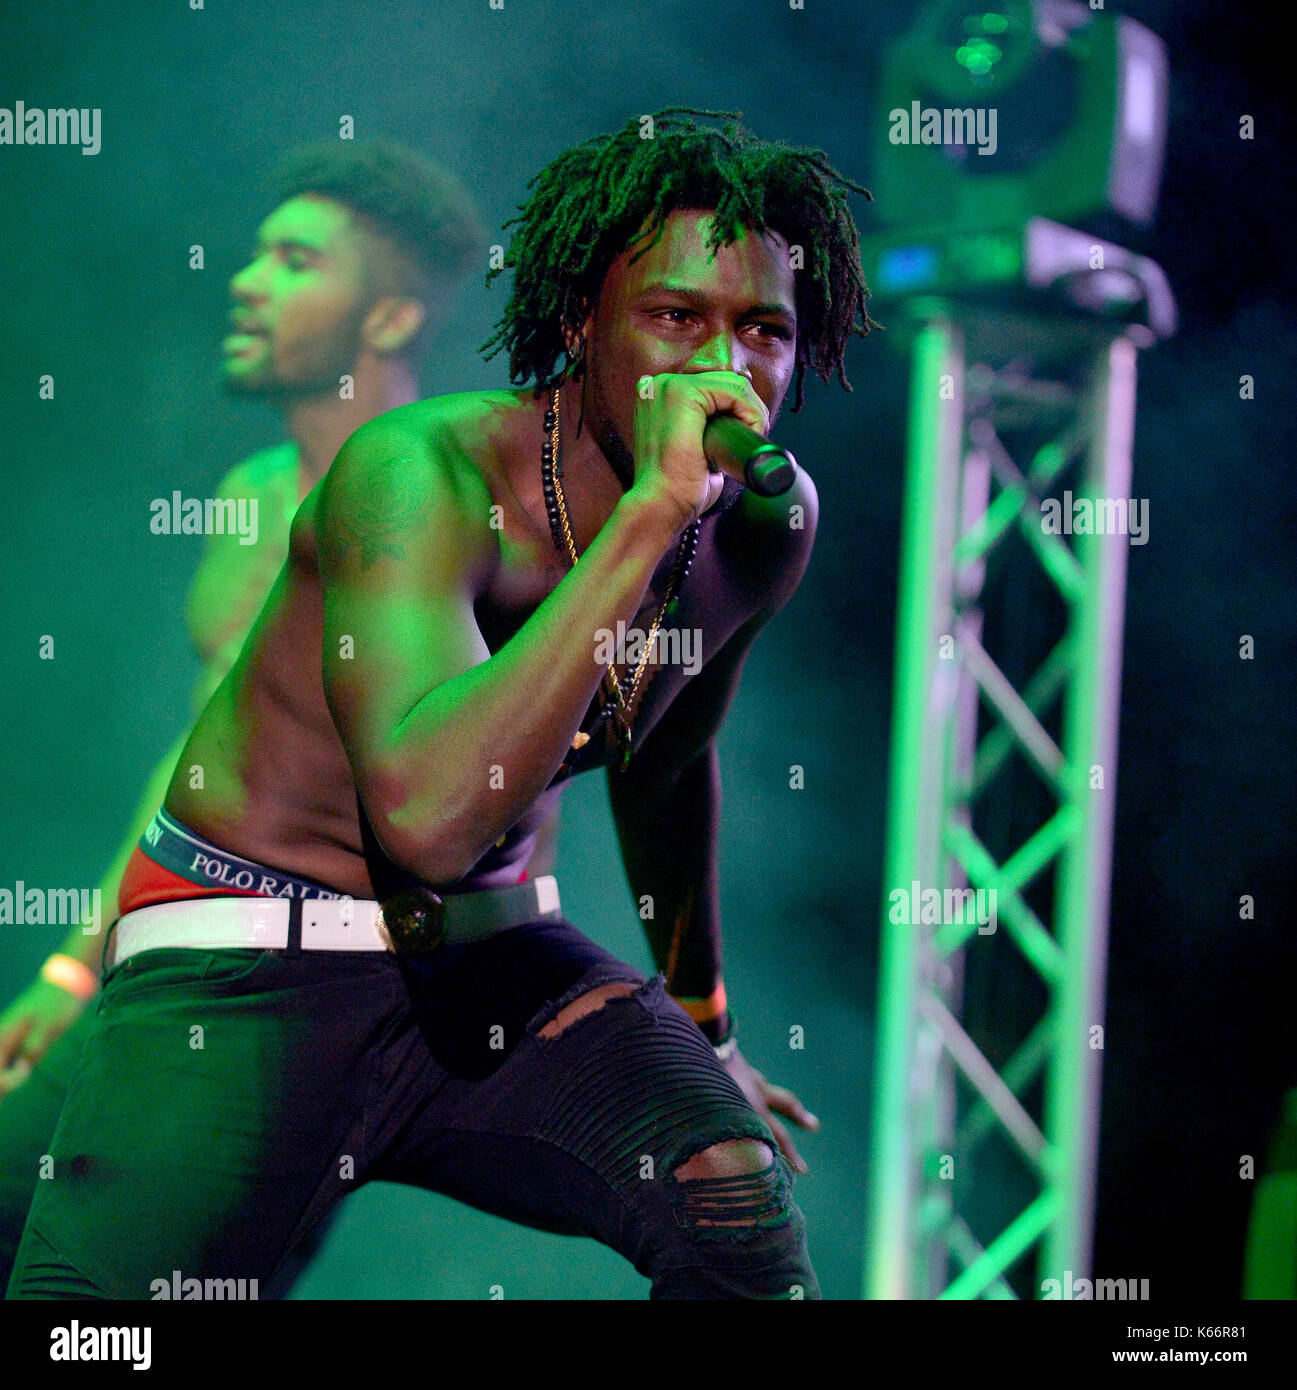 Kodak Black performs on stage at his Homecoming Concert at Watsco Center in Coral Gables, Florida, in first show since his release from prison in June.  Featuring: Johnny Oz Where: Coral Gables, Florida, United States When: 10 Aug 2017 Credit: JLN Photography/WENN.com Stock Photo